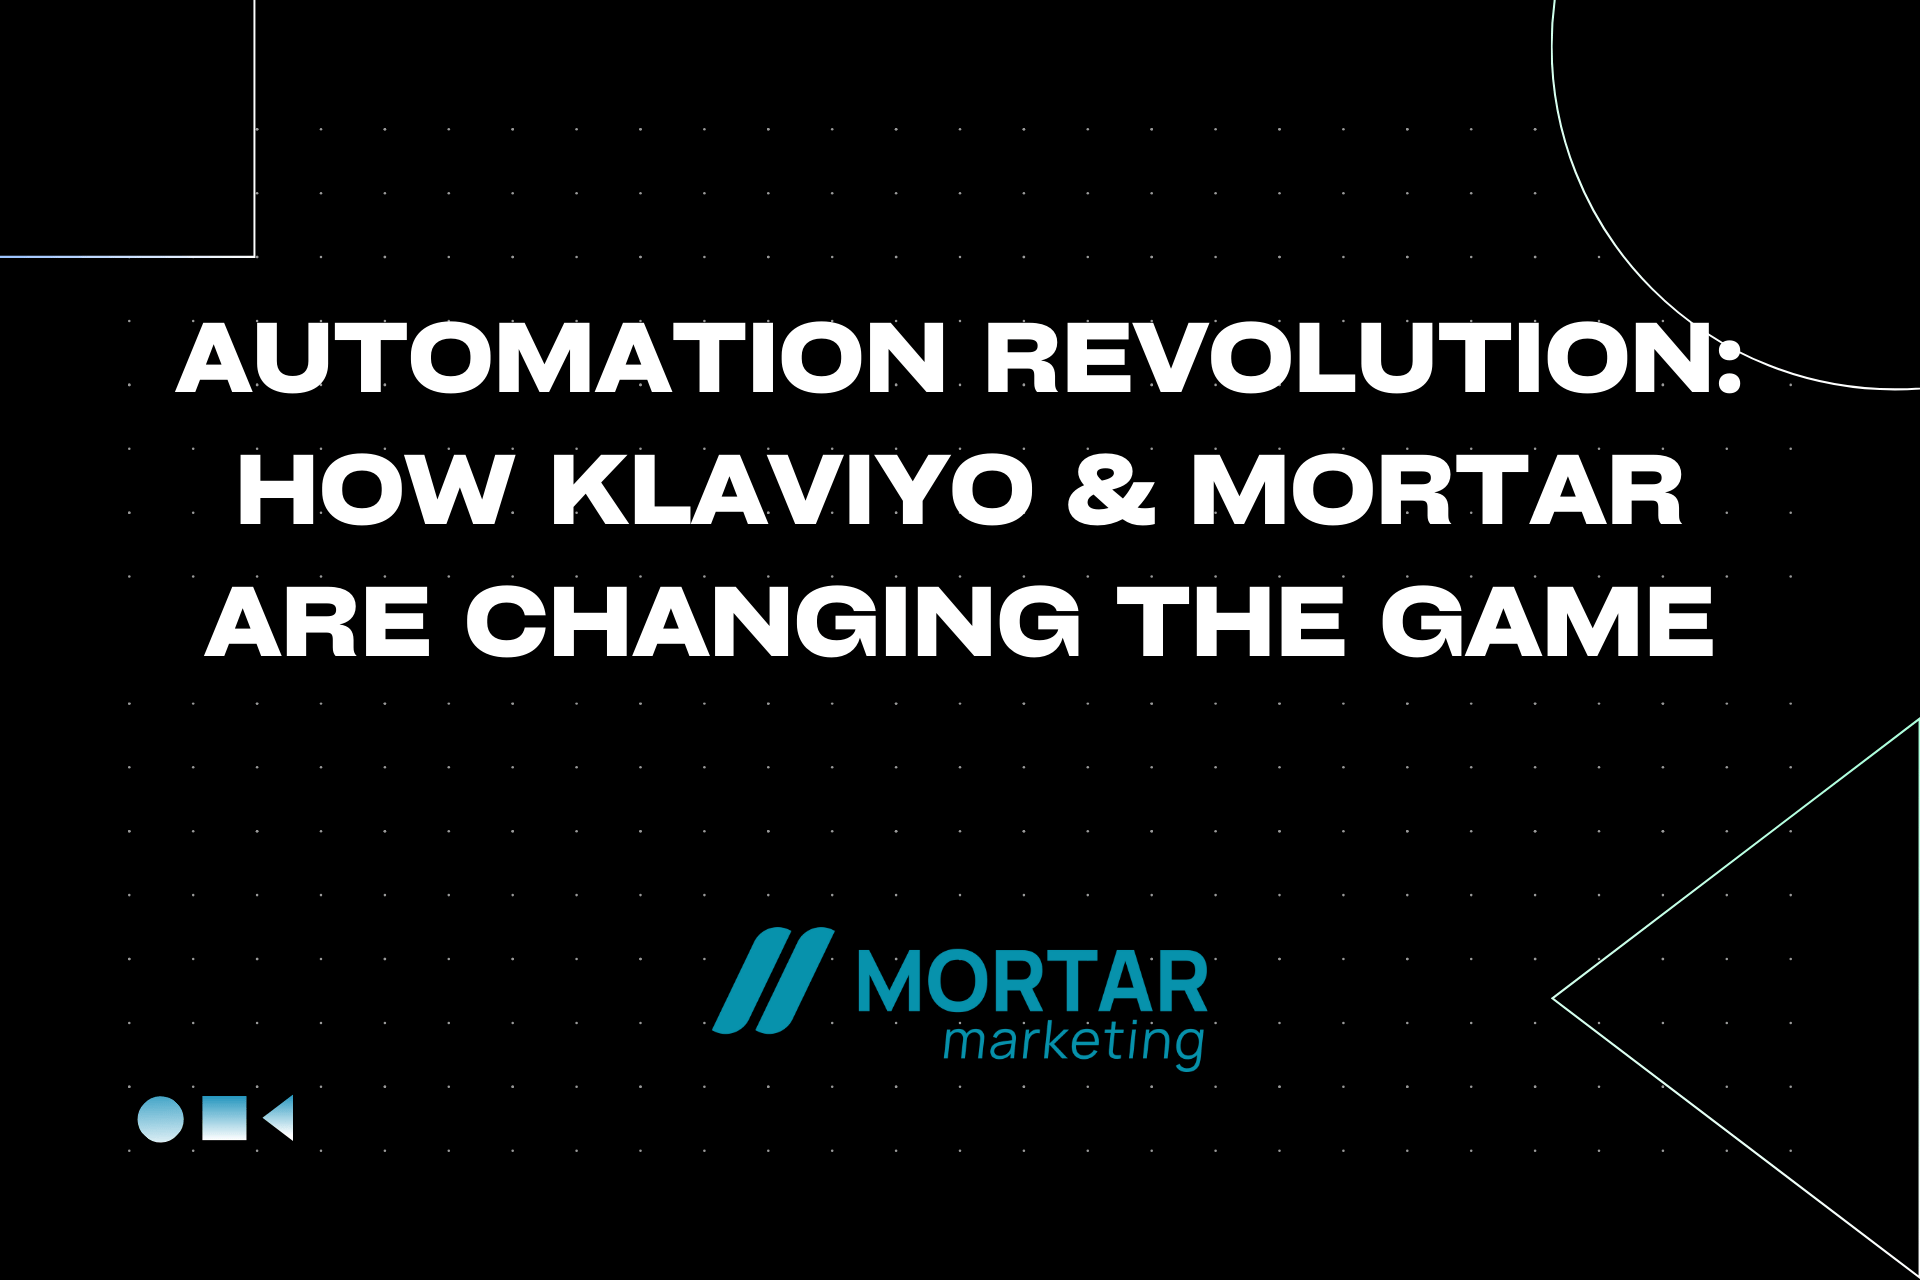 Automation Revolution: How Klaviyo & Mortar Are Changing the Game